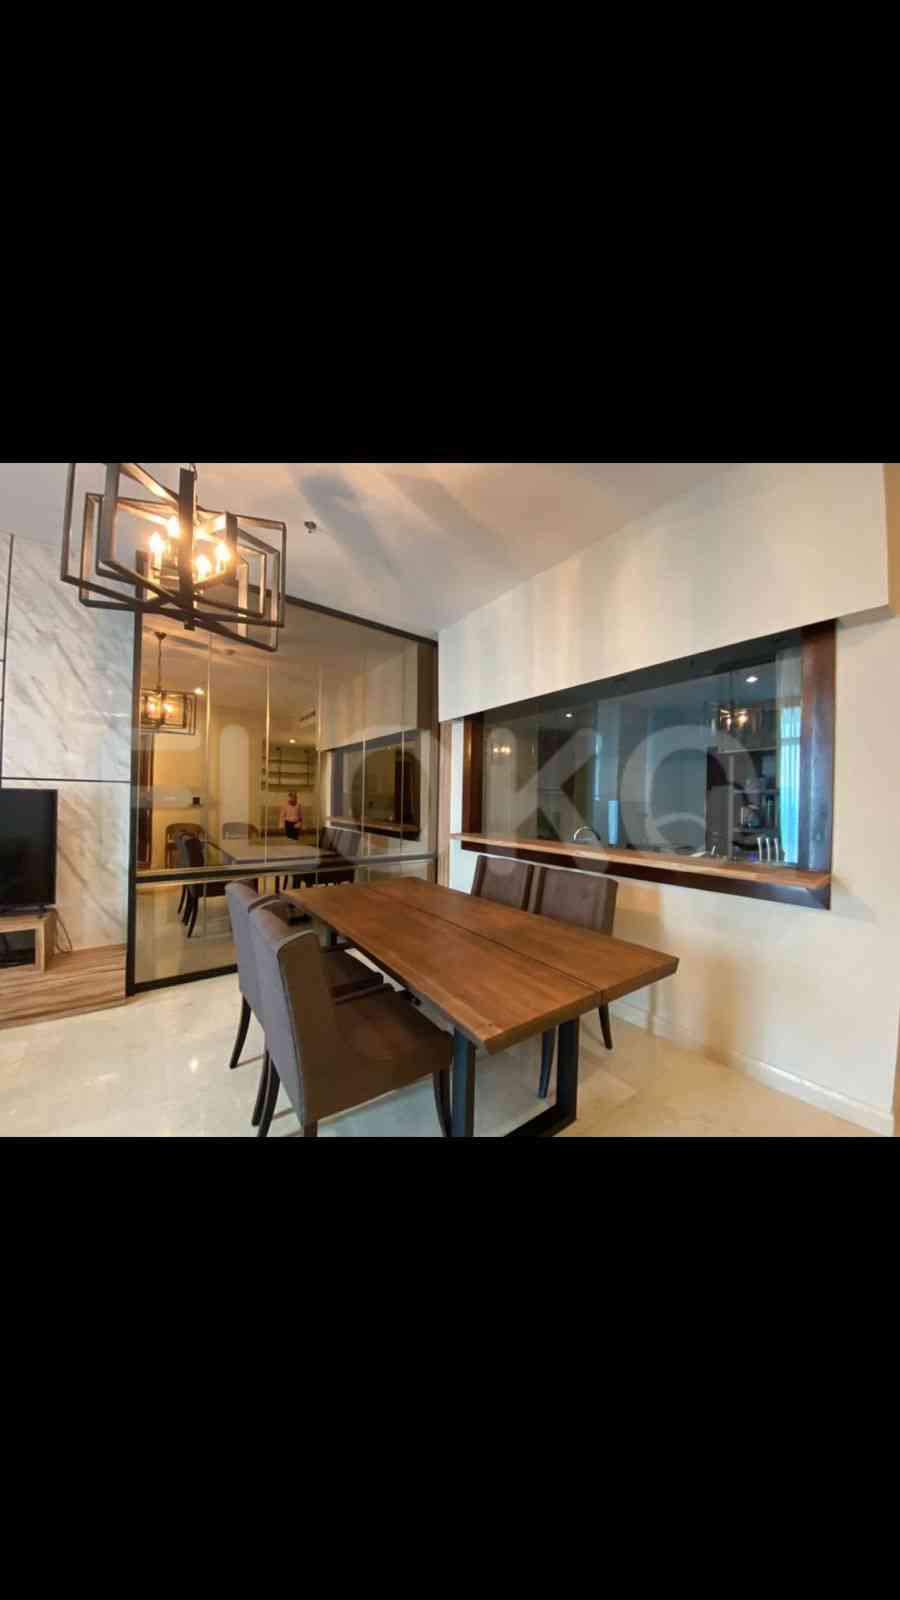 2 Bedroom on 17th Floor for Rent in Essence Darmawangsa Apartment - fci682 6